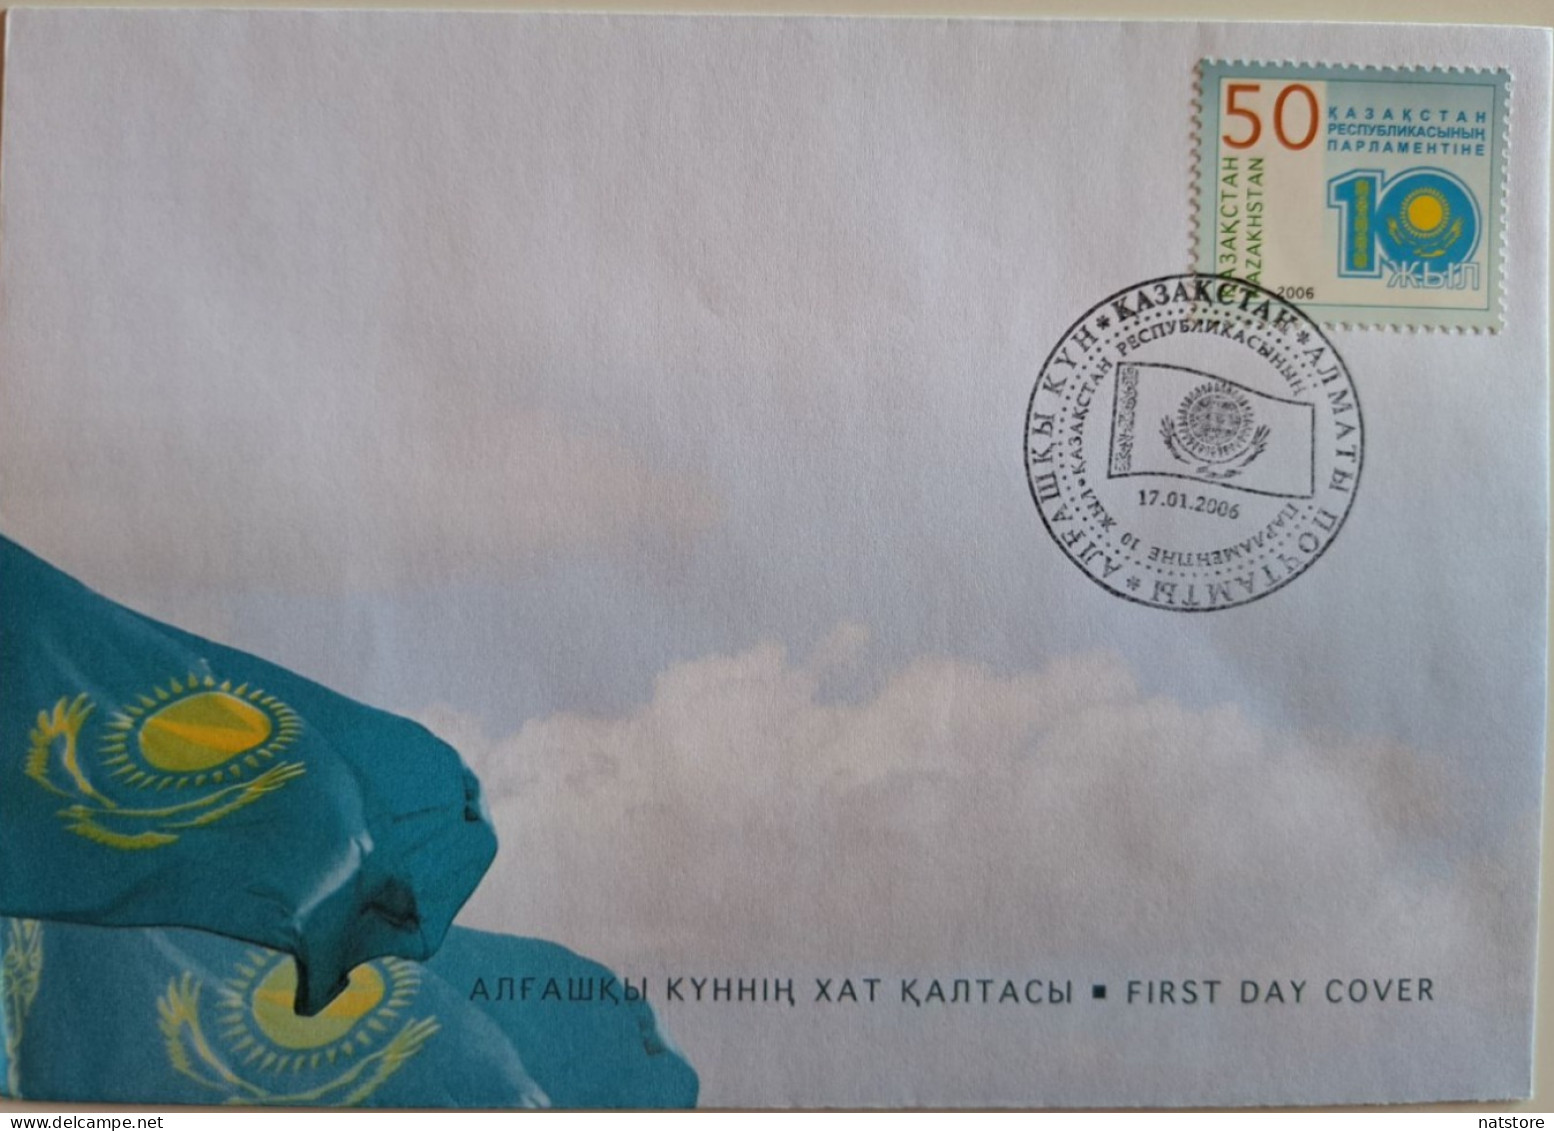 2006..KAZAKHSTAN...FDC WITH  STAMP...NEW..The 10th Anniversary Of Parliament Of Republic Of Kazakhstan..RARE!!! - Covers